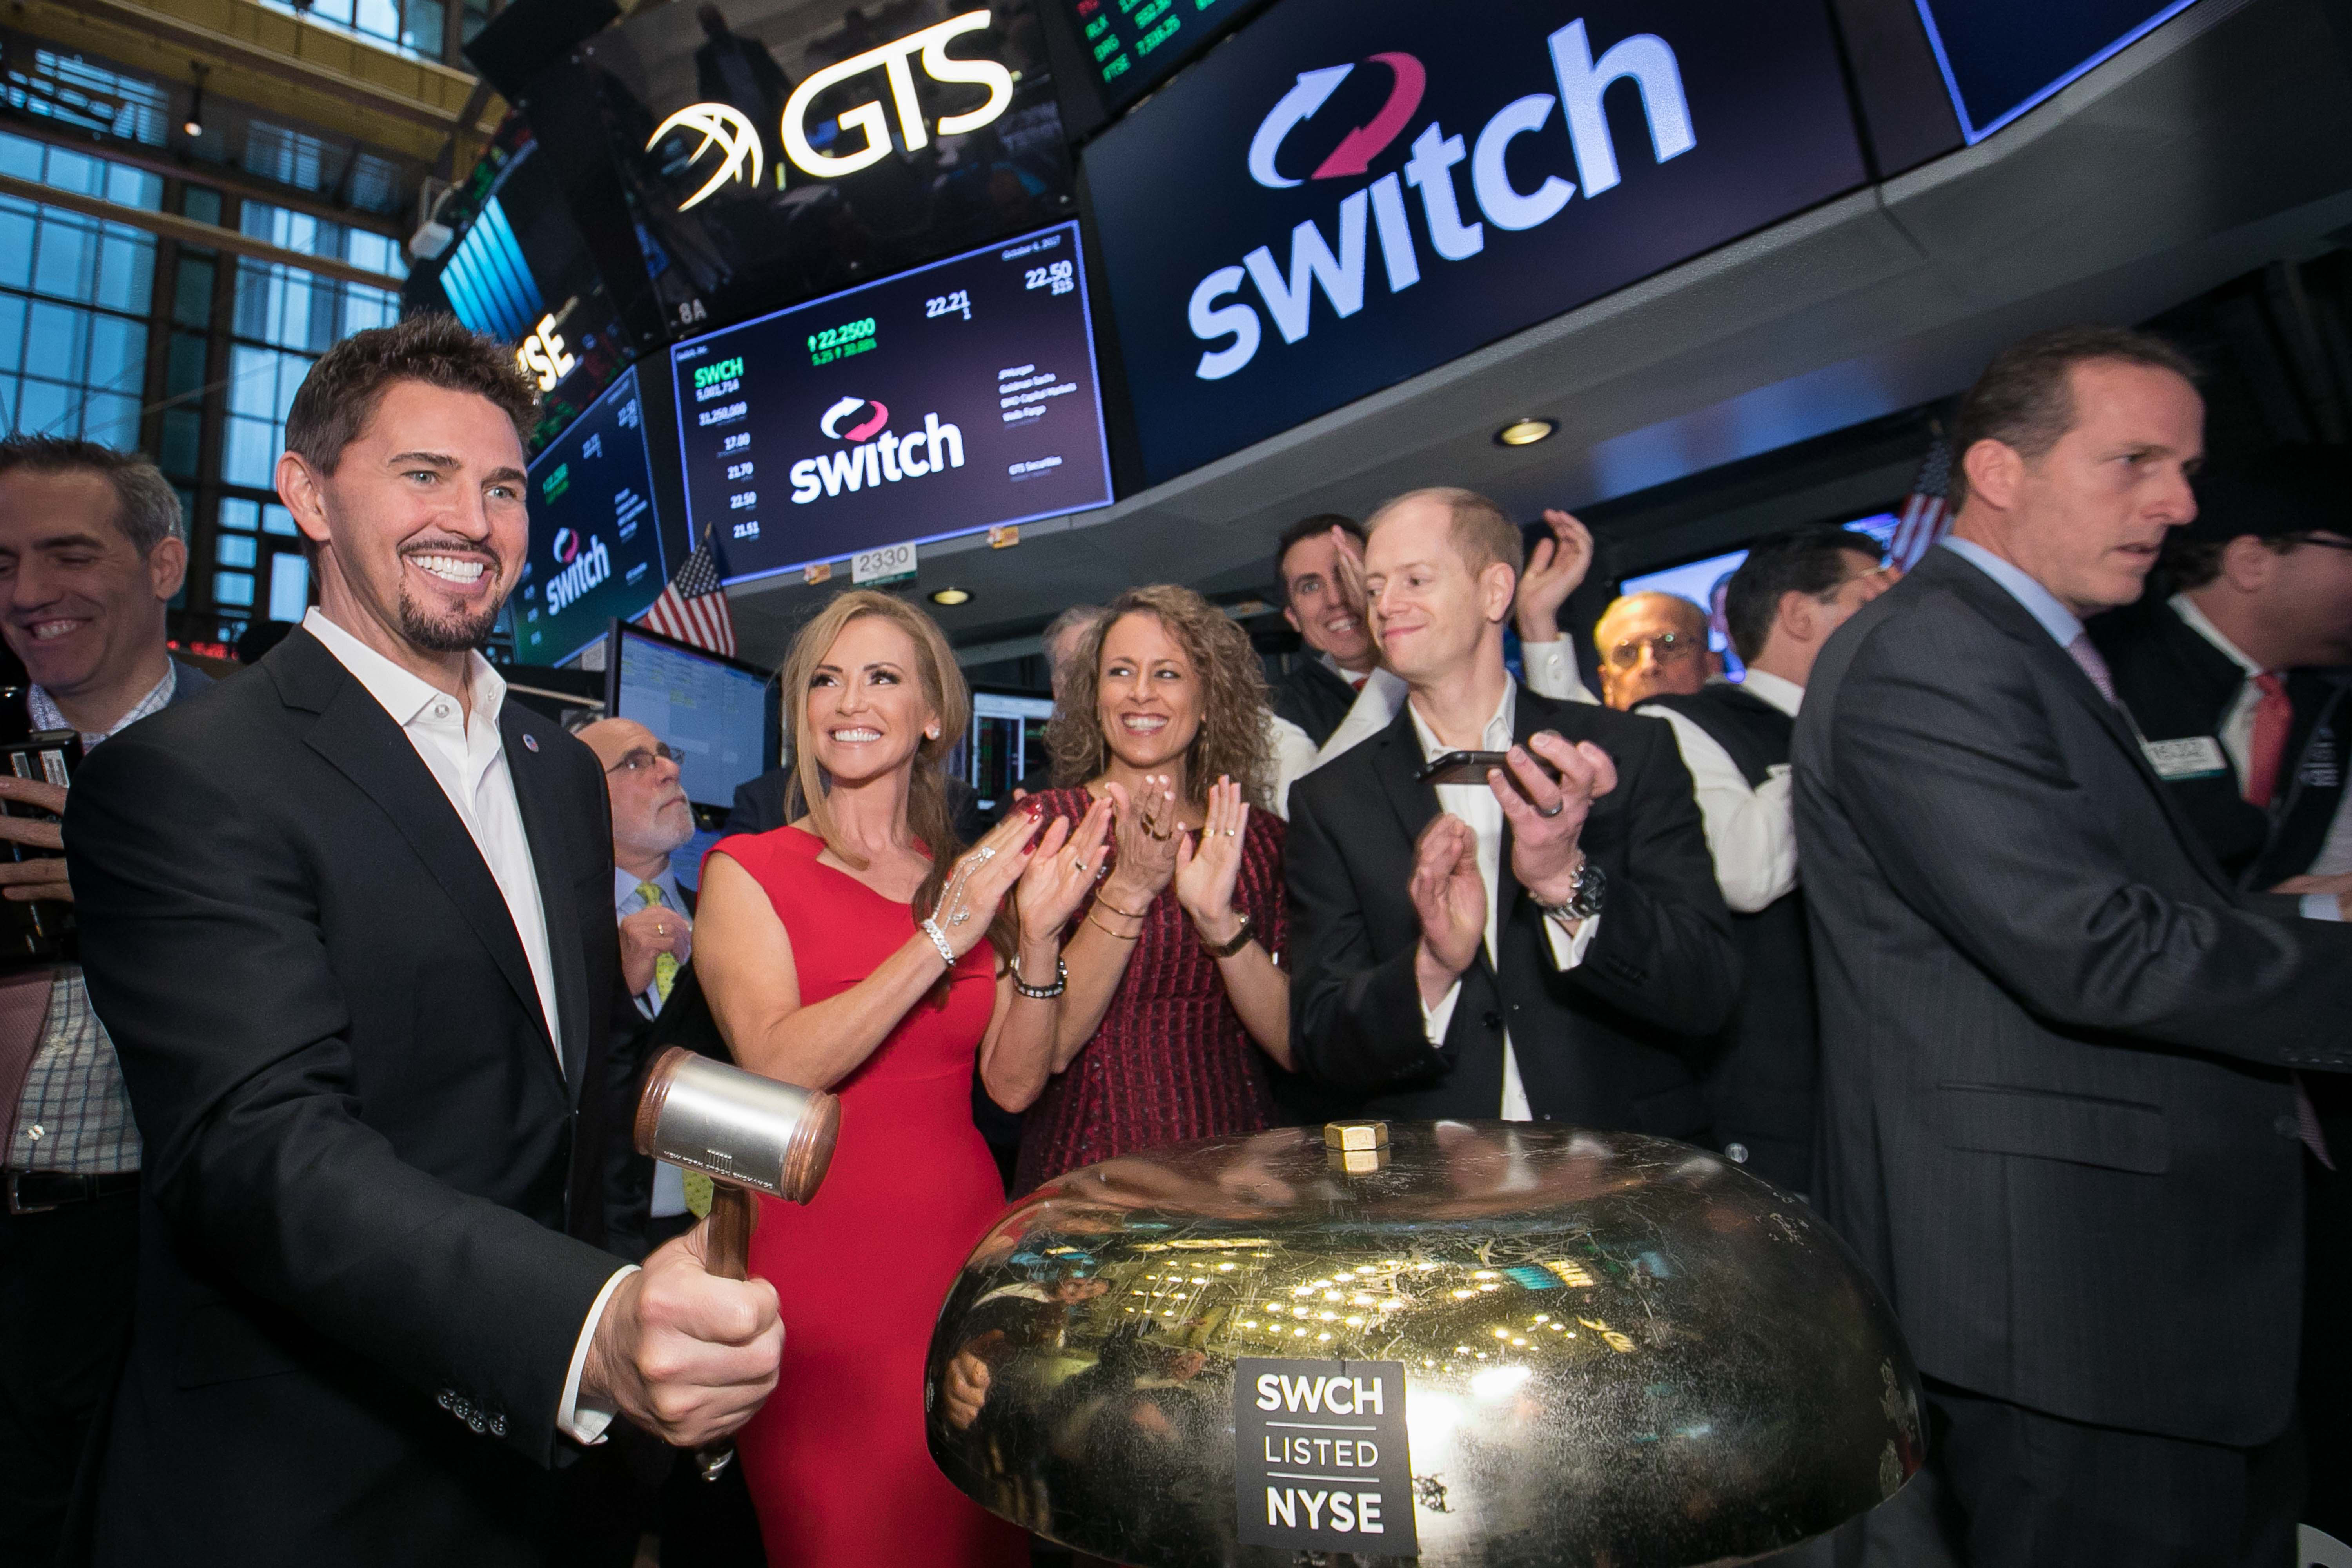 Switch finishes up 22% in data center IPO